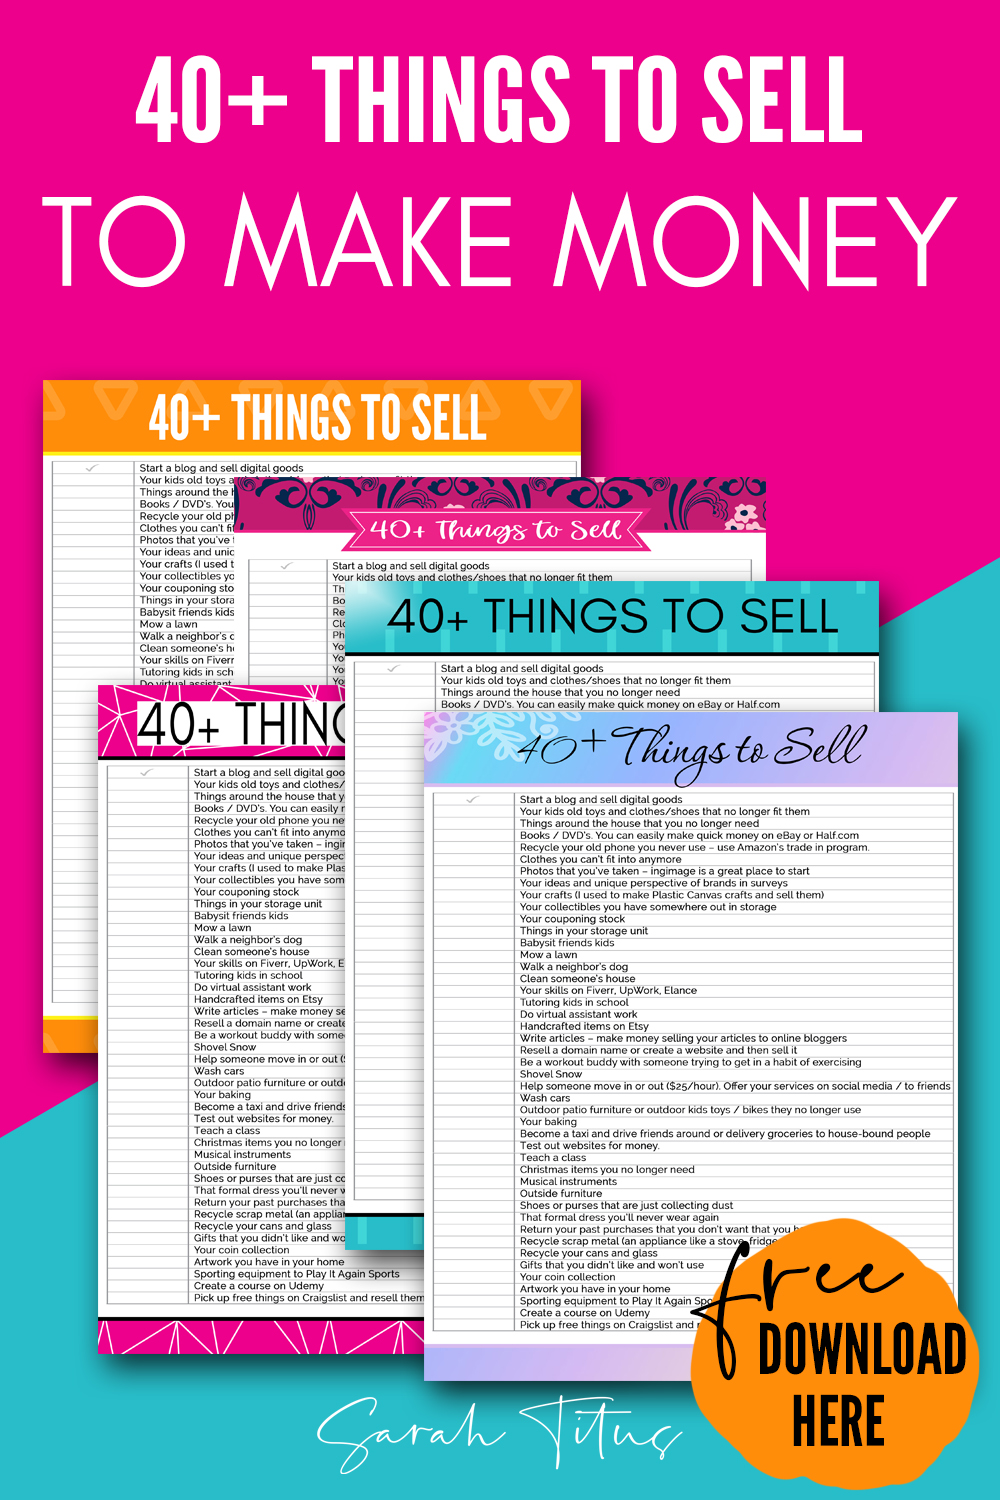 100 Things to Sell on eBay - My Money Chronicles